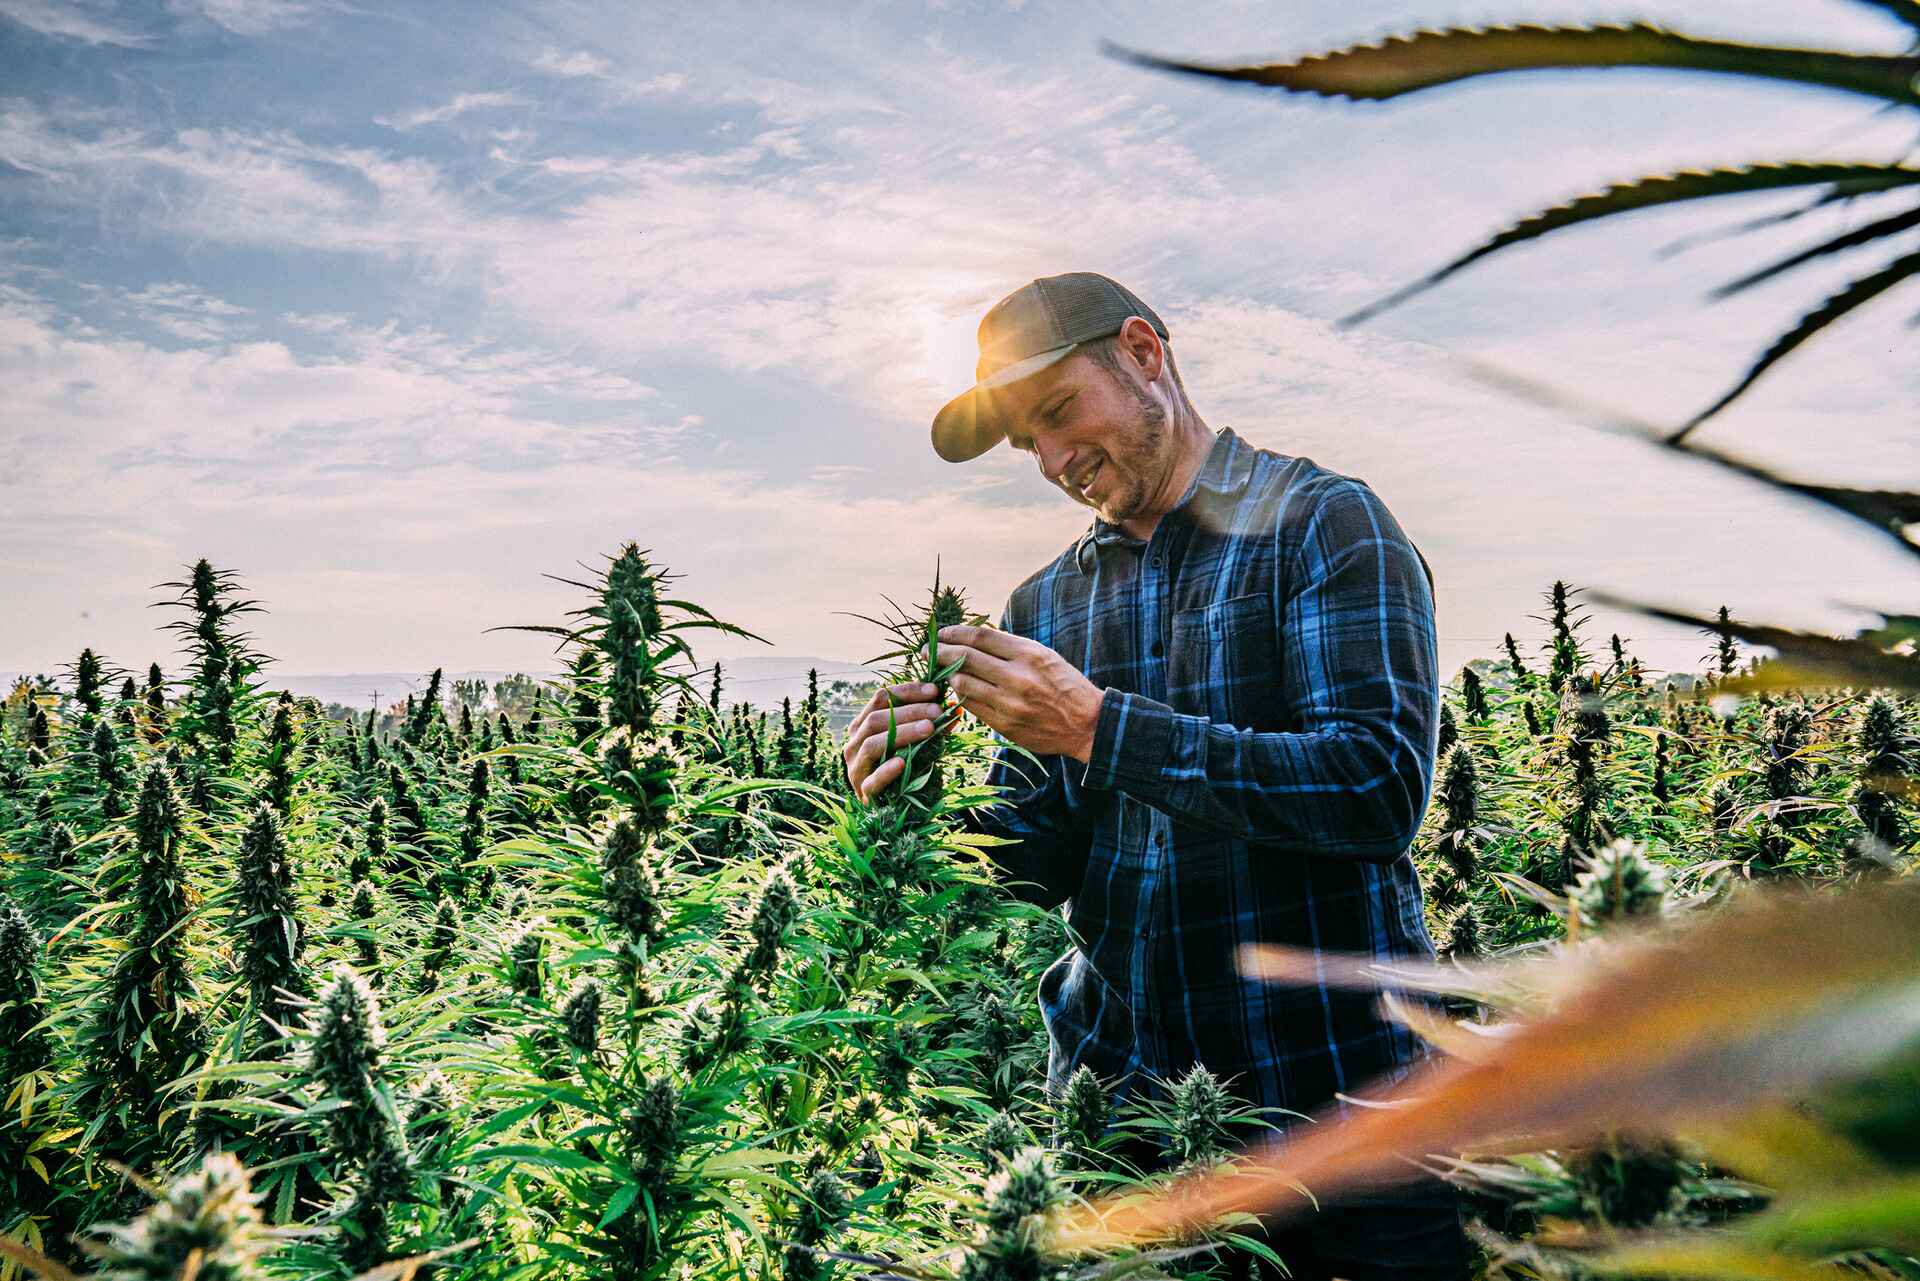 A farmer’s guide to growing hemp in the USA